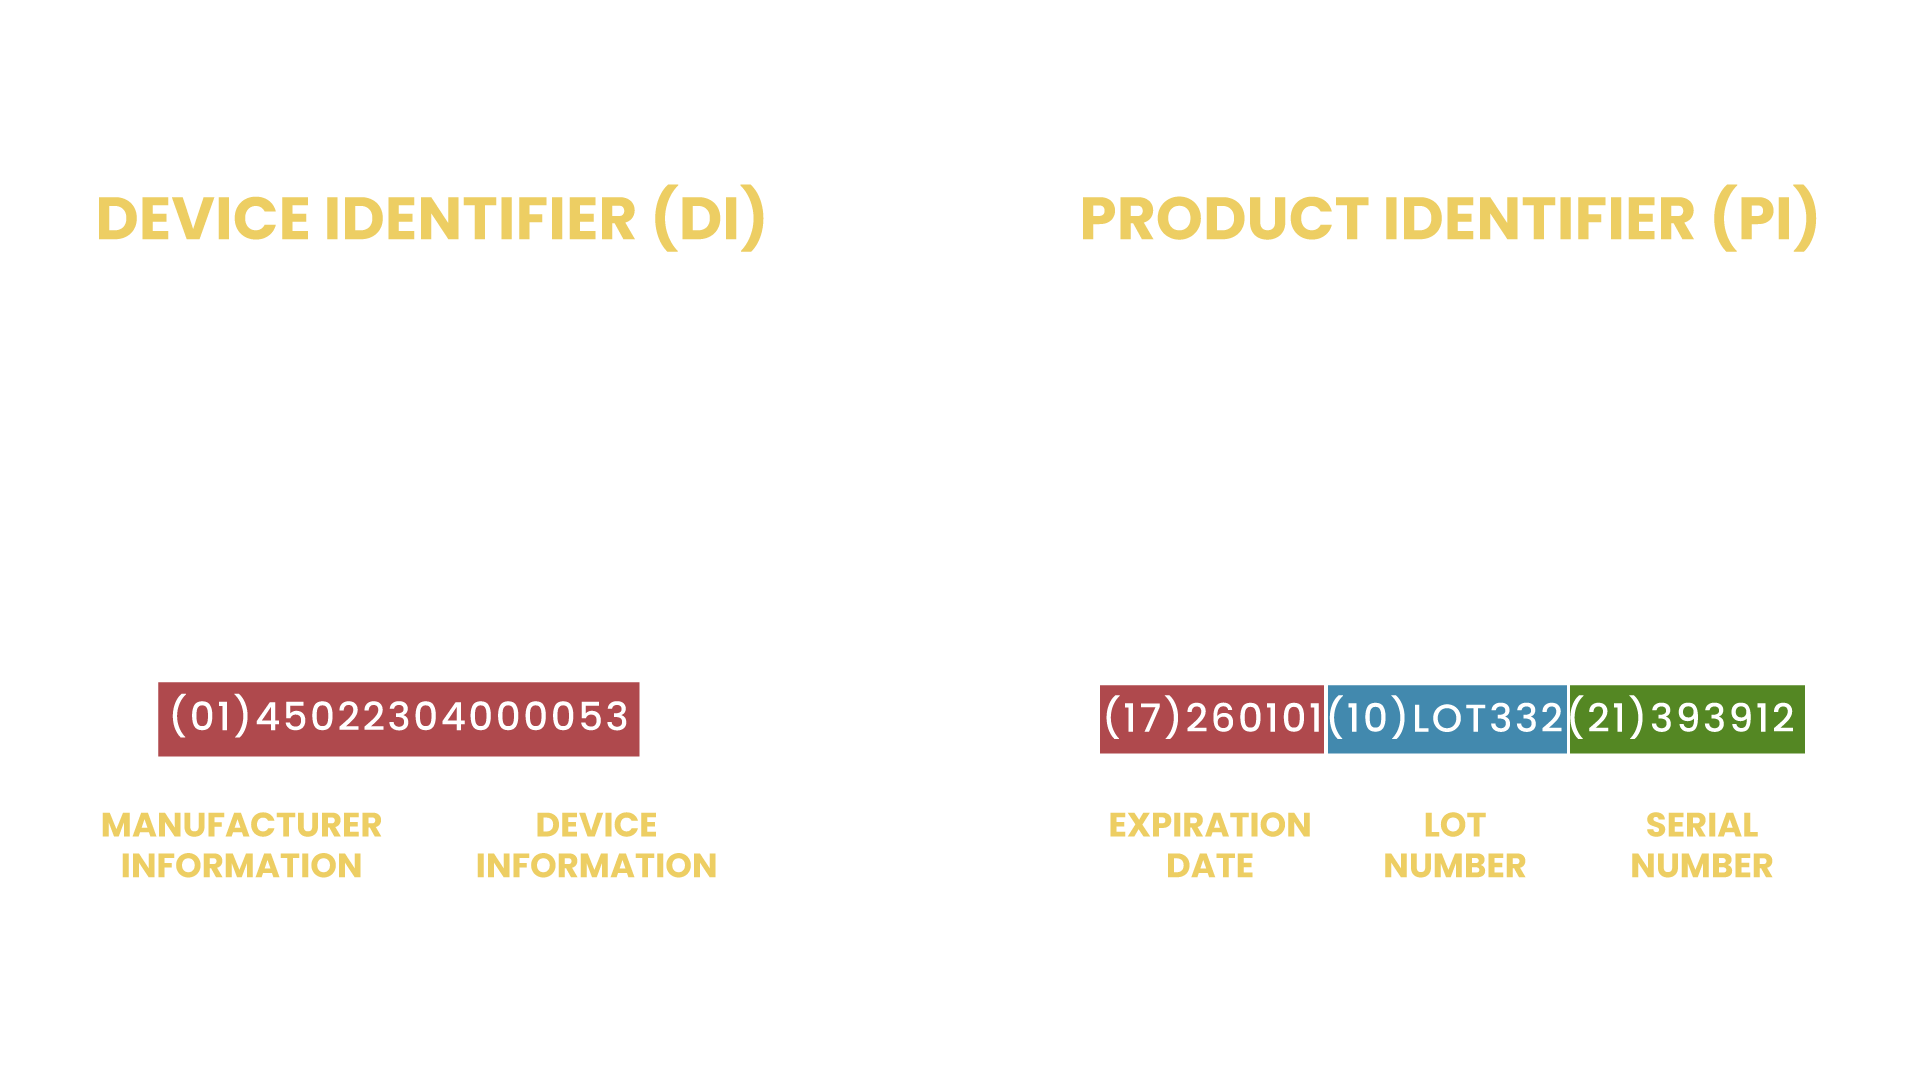 A UDI barcode is broken into two components, the Device Identifier (DI) and the Product Identifier (PI).